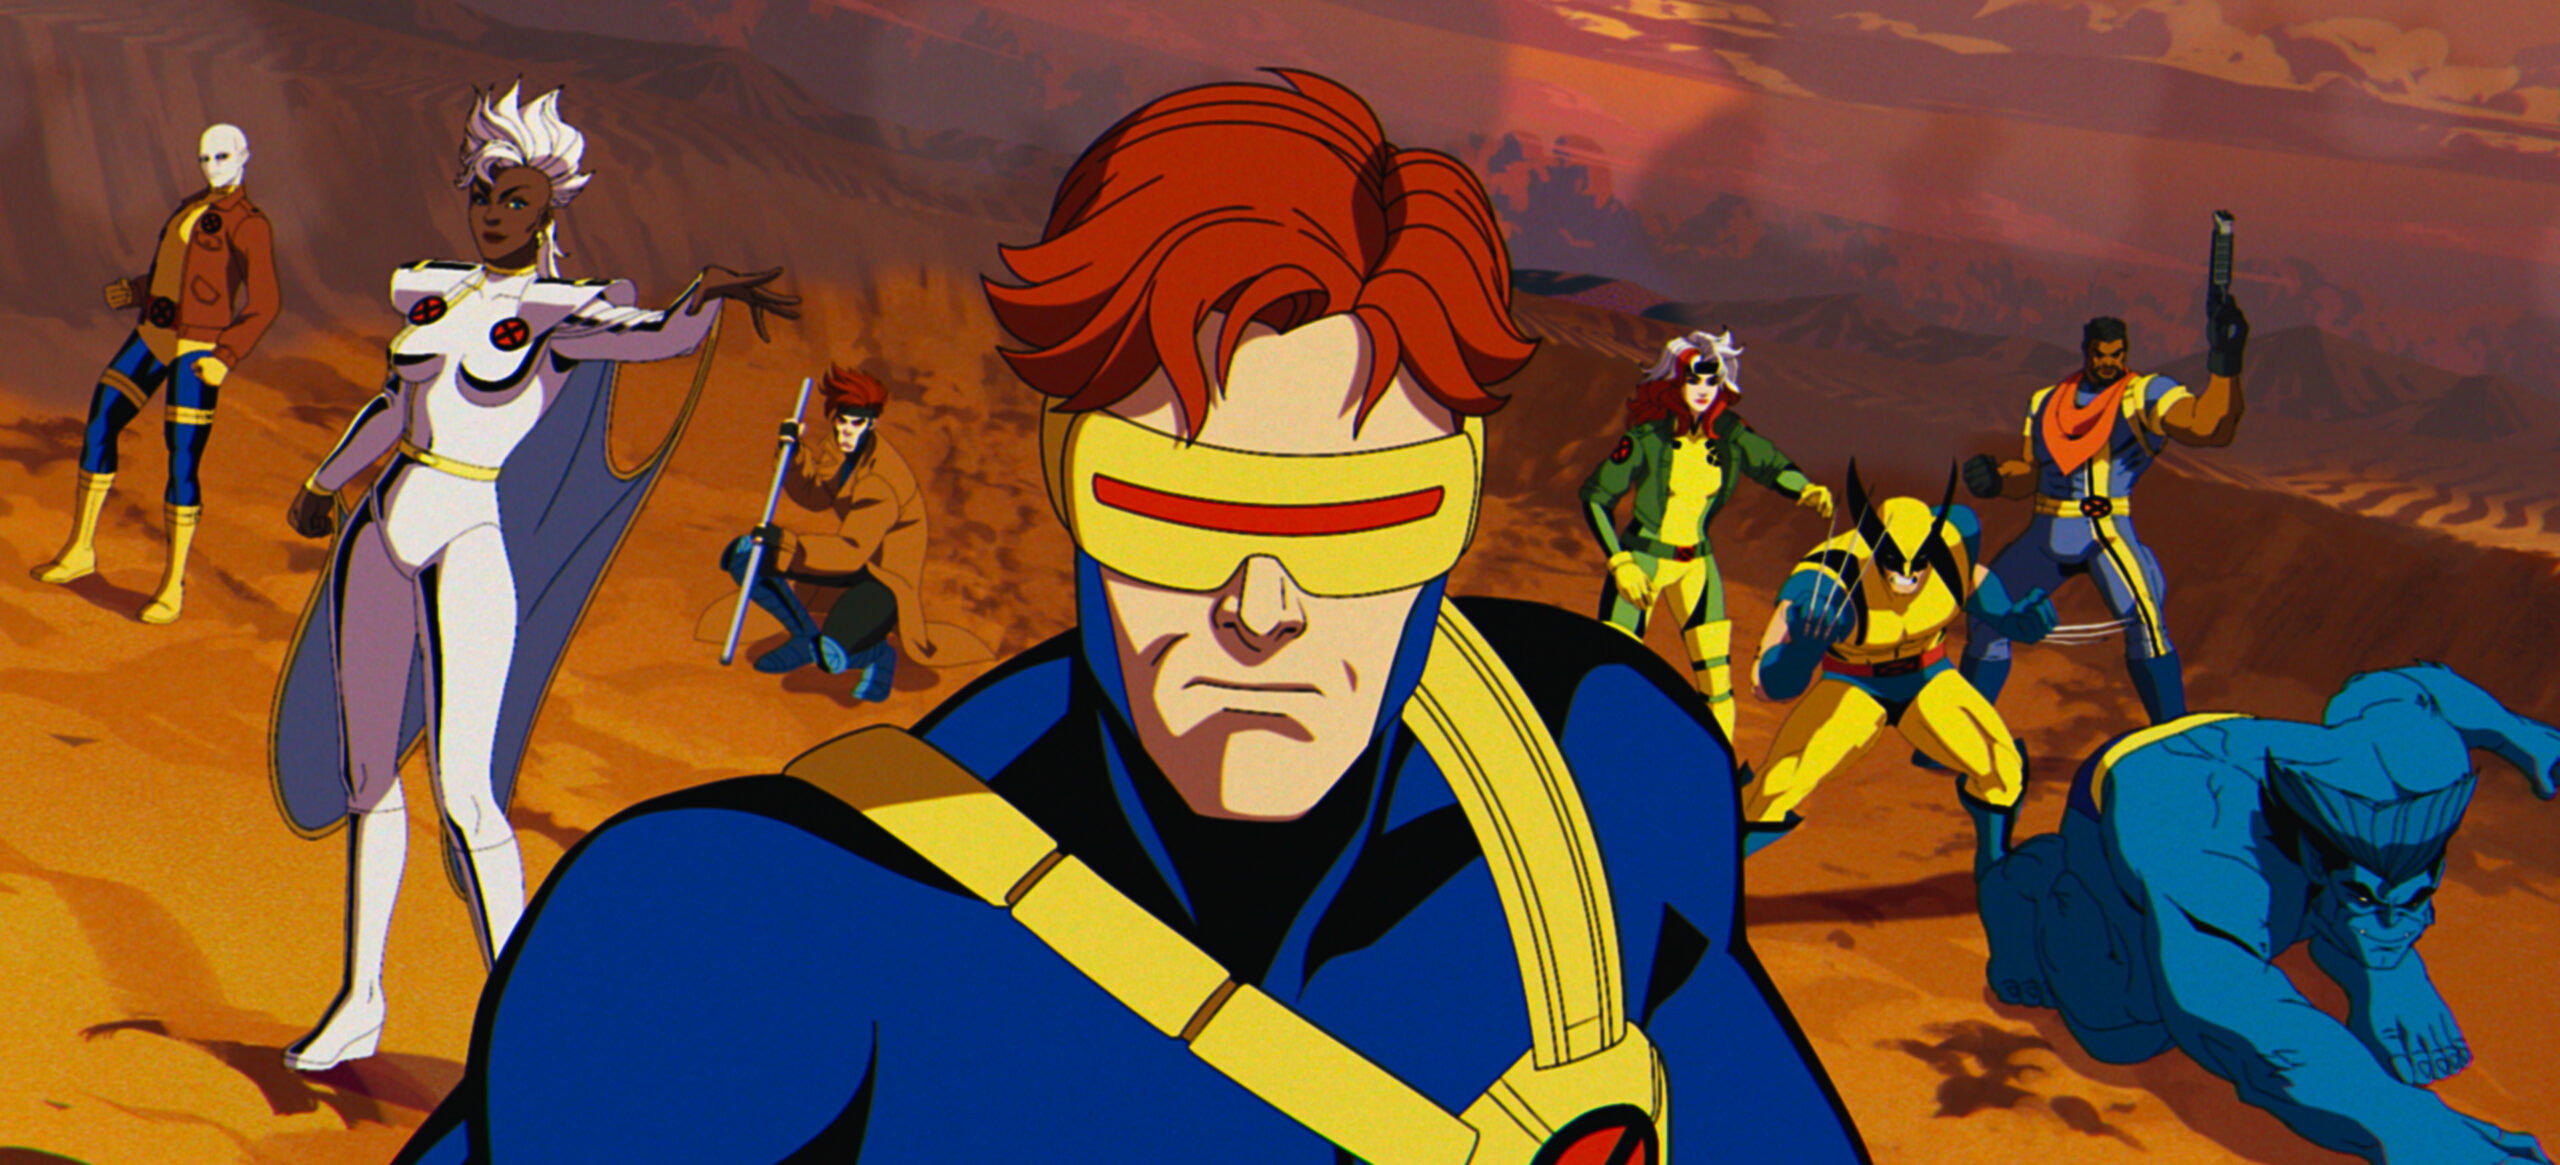 First Look At “X-Men 97” Animate Series For Disney+